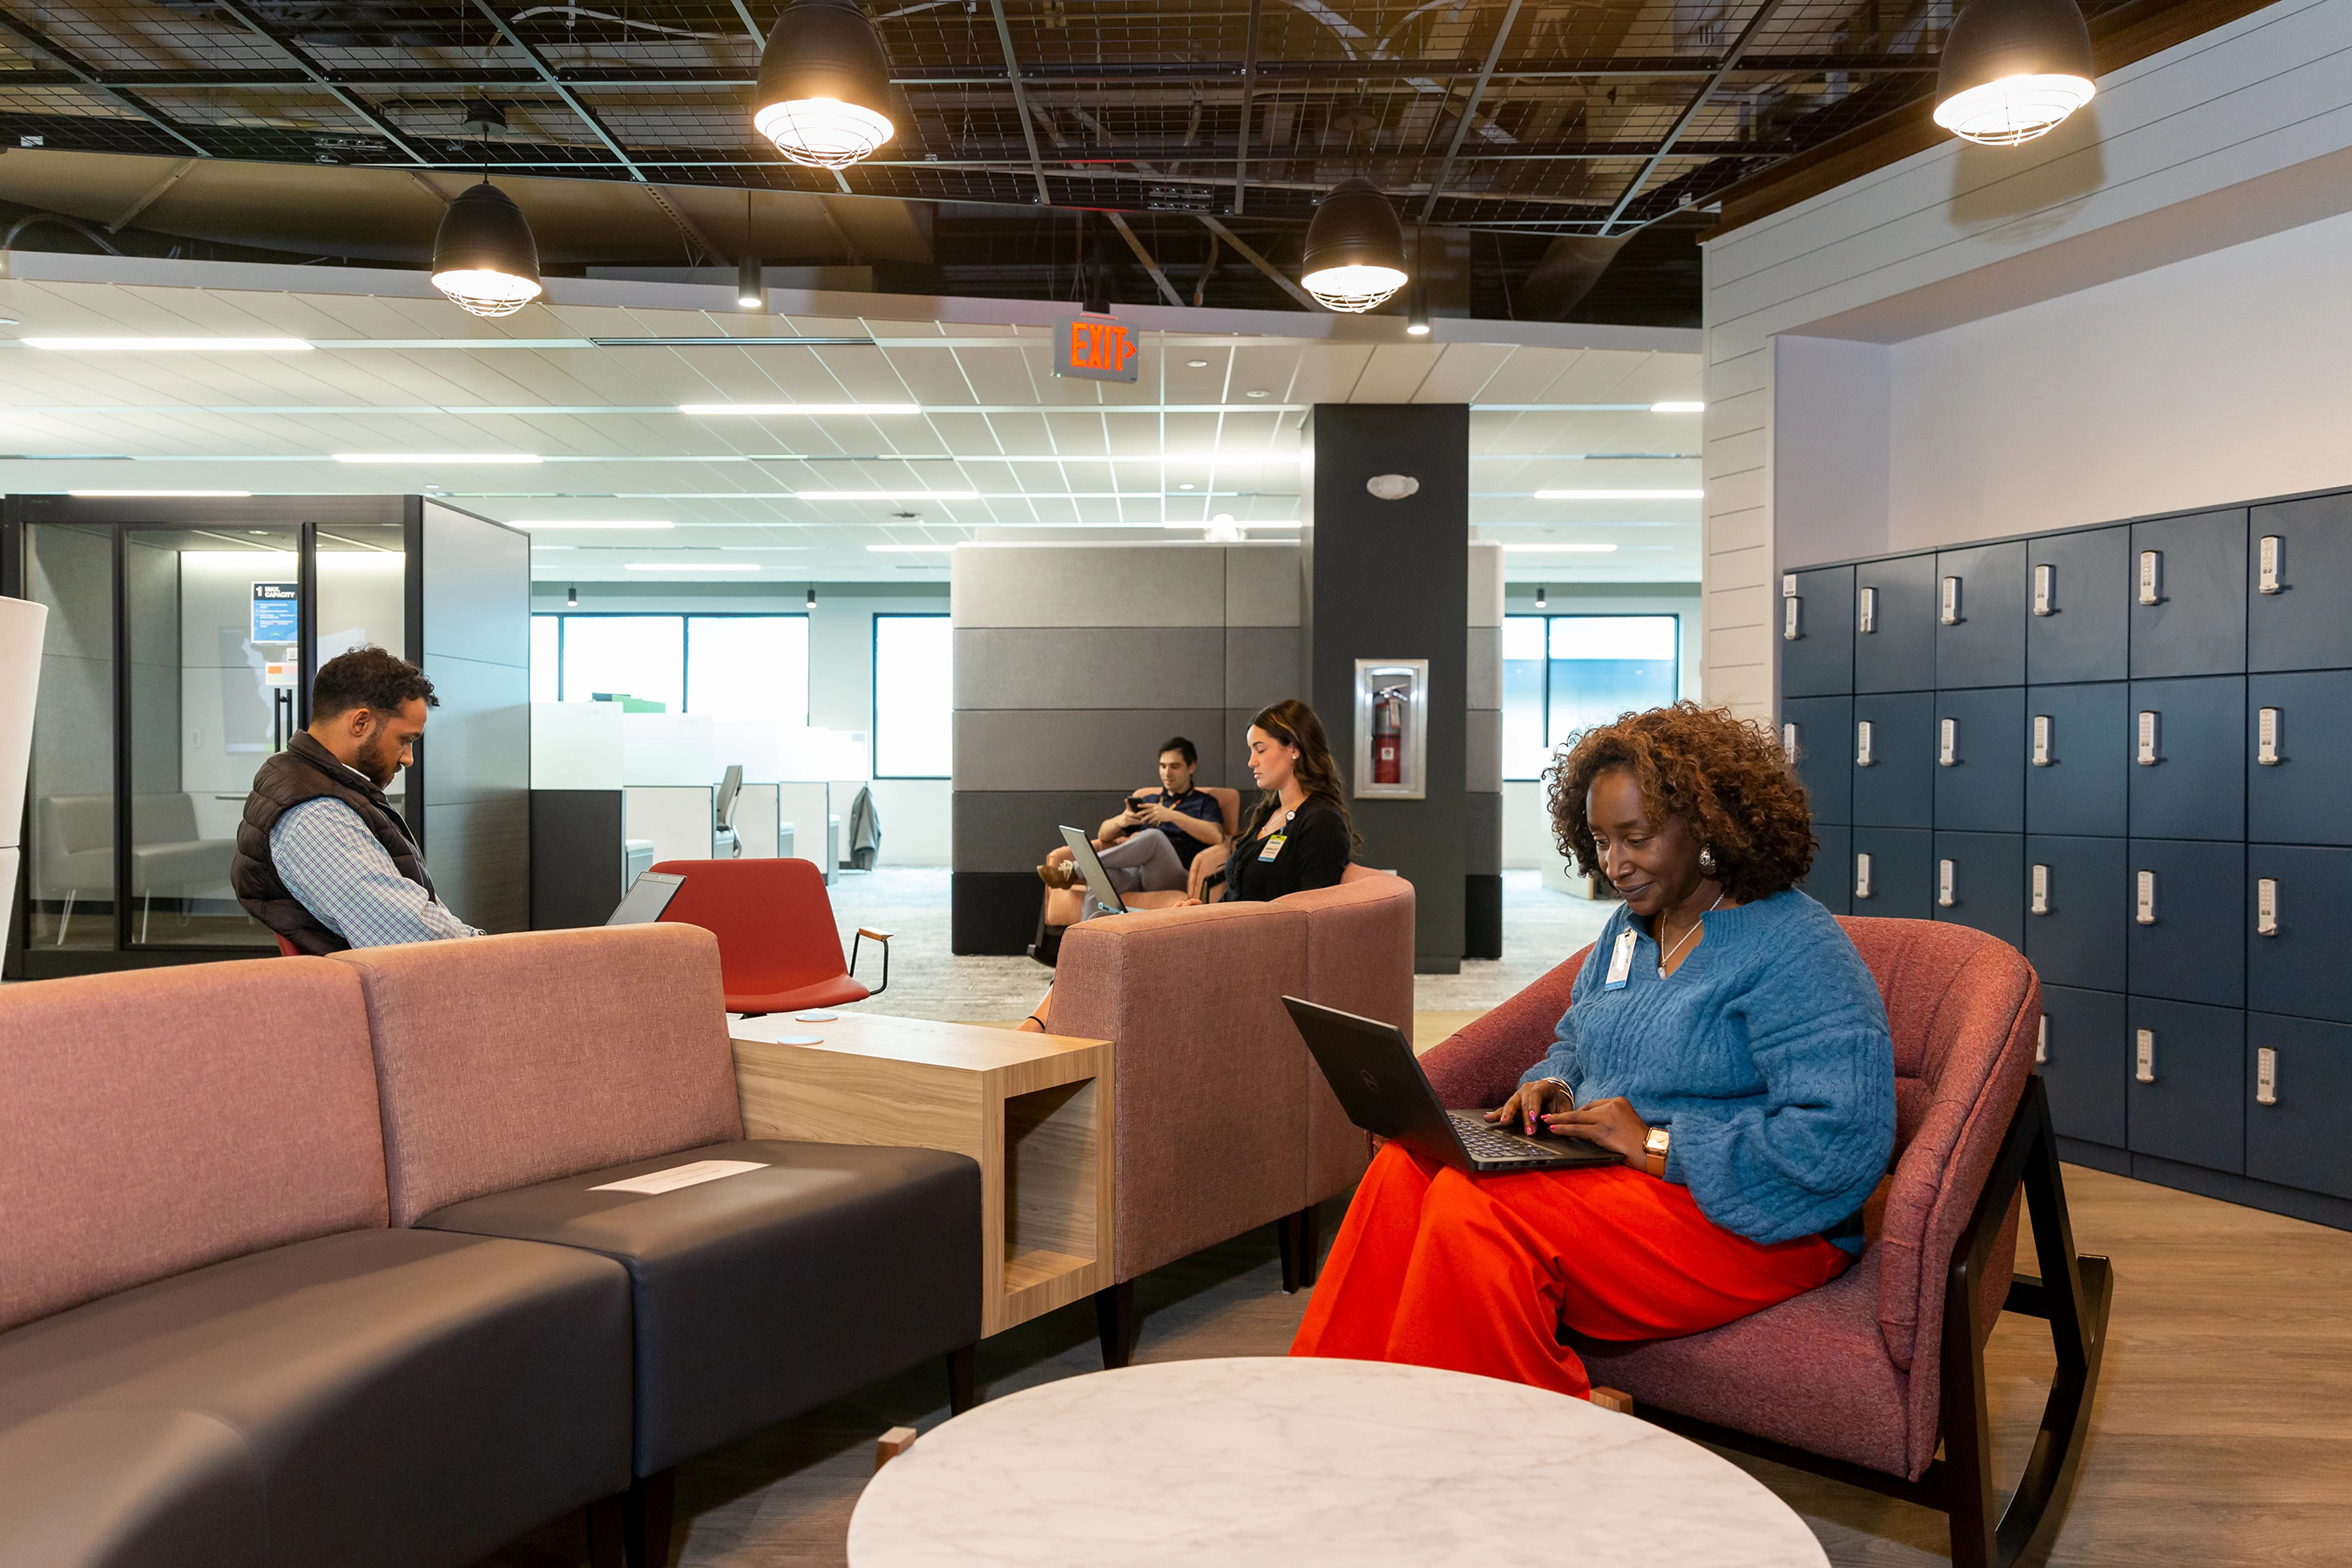 Team members can enjoy and utilize a variety of spaces designed for focused, individual or collaborative group work.